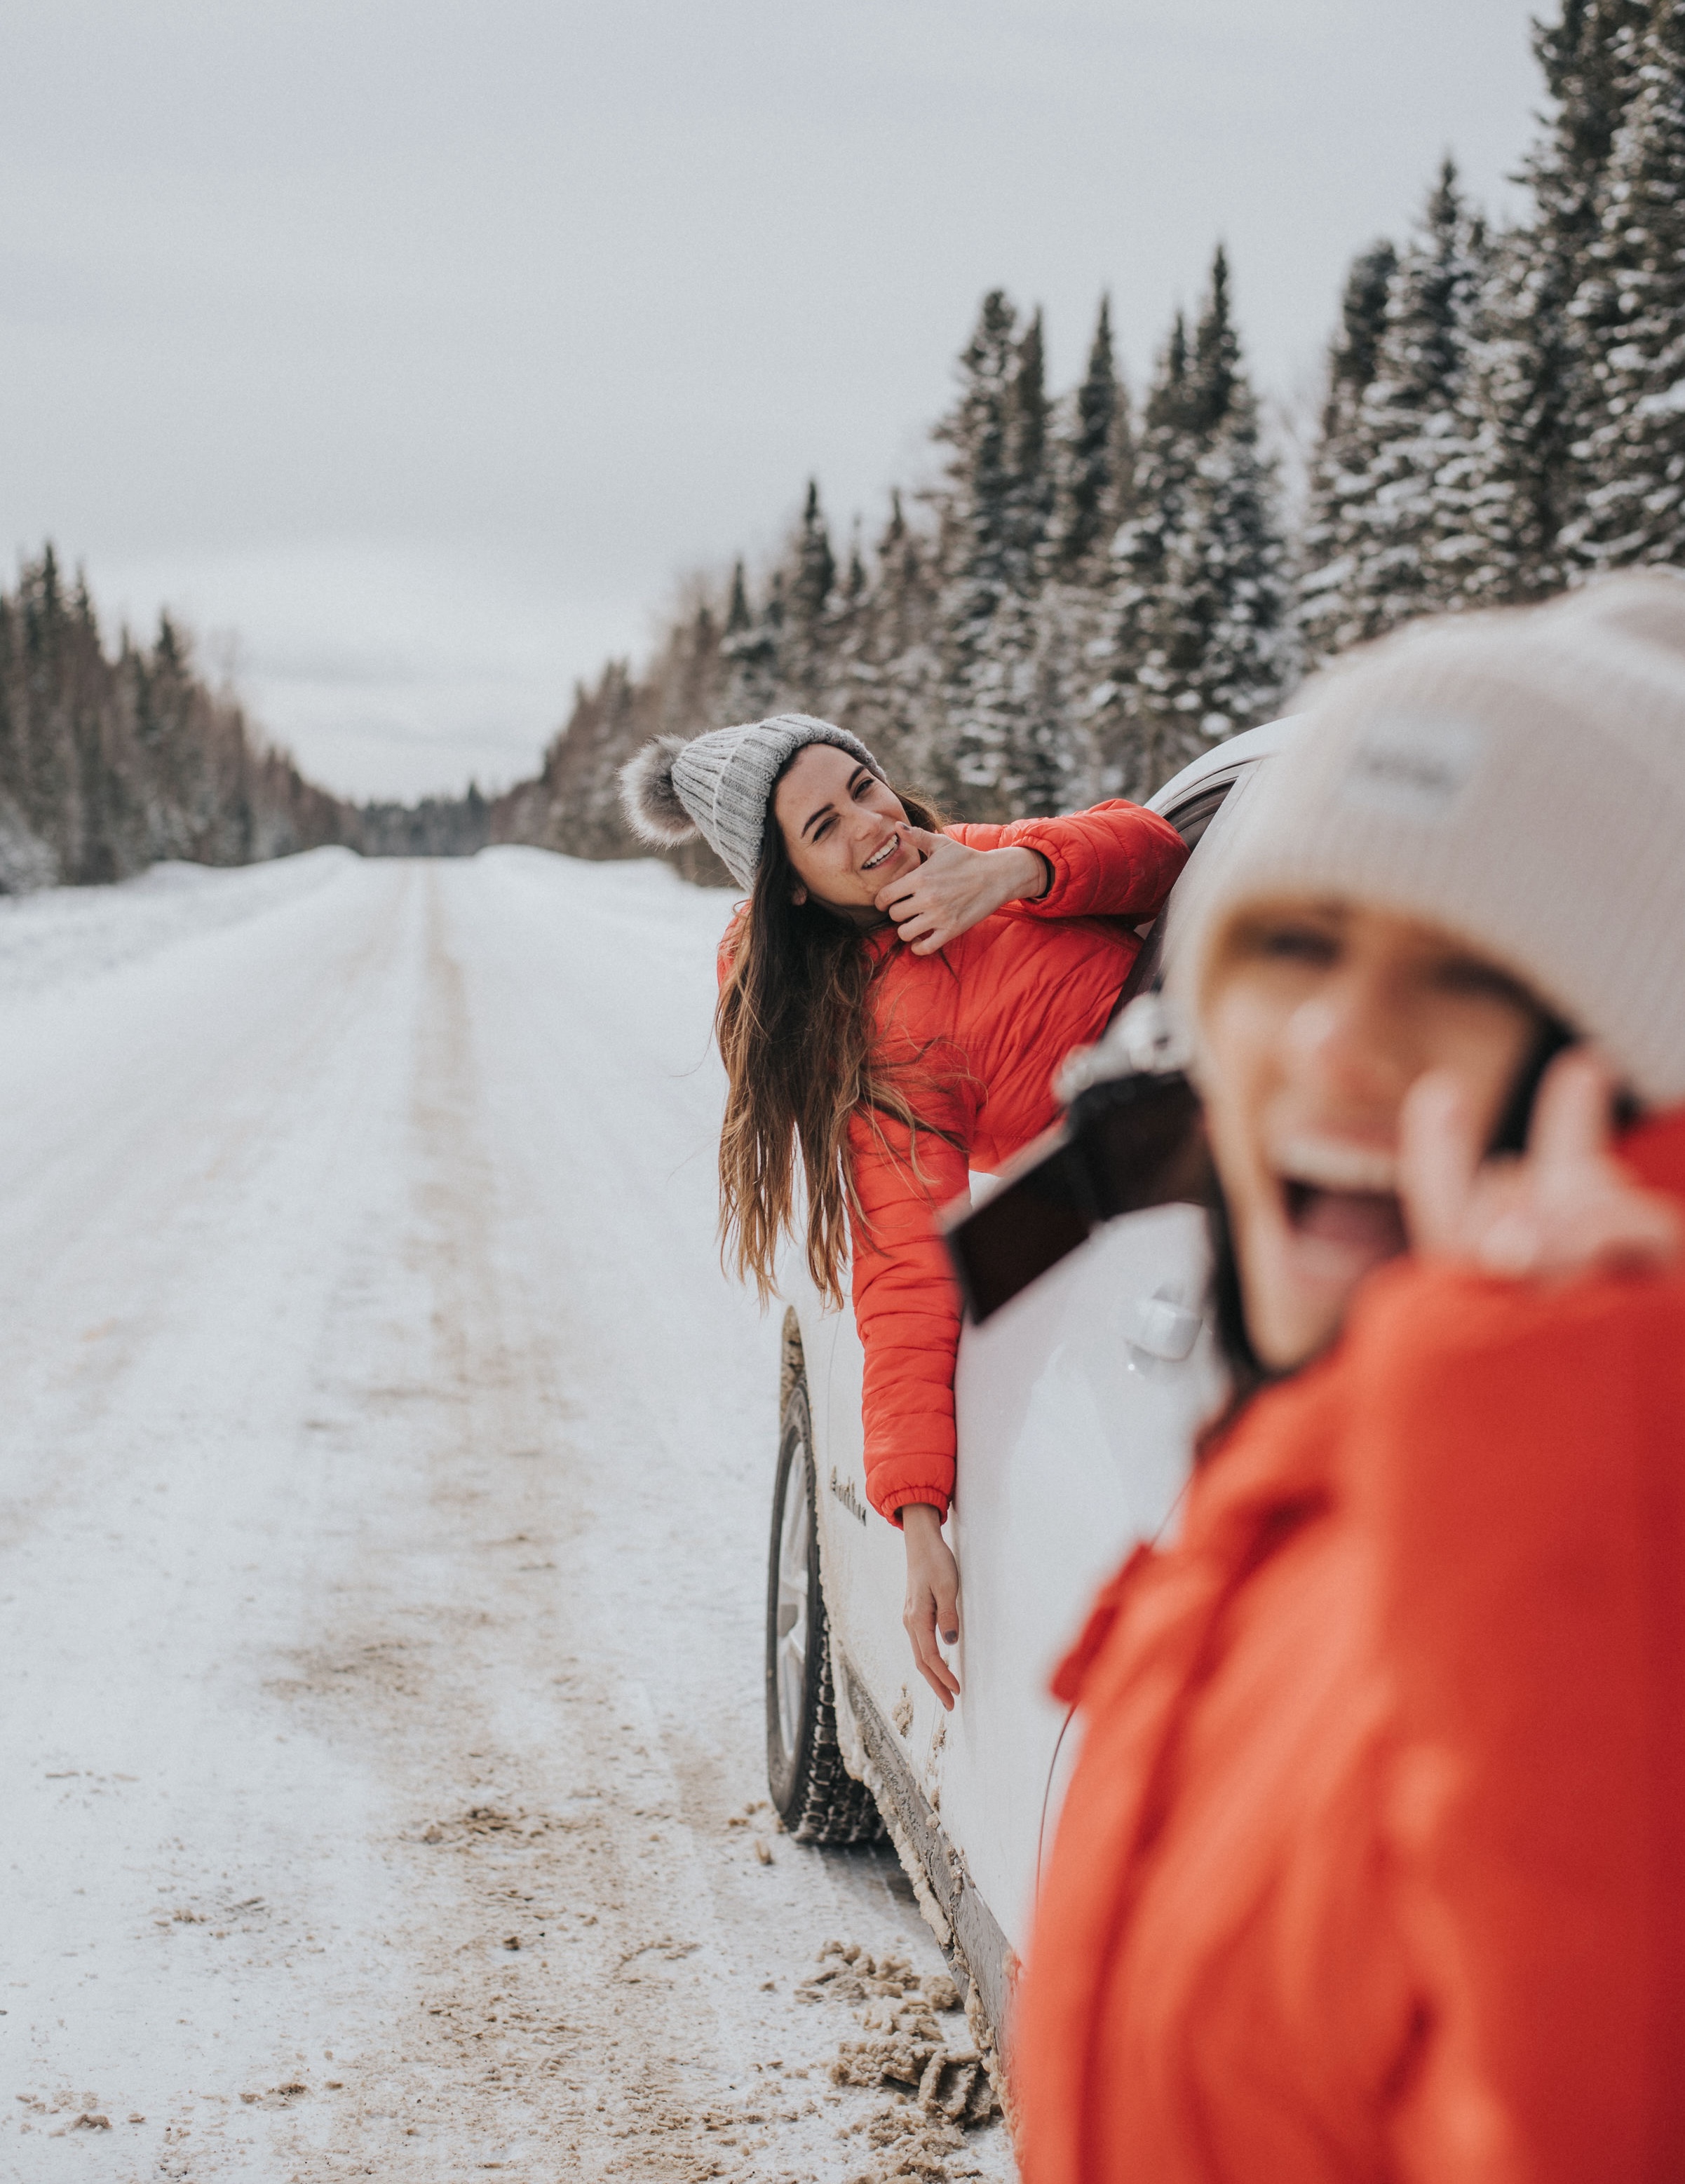 two people in winter outdoor clothing smiling and laughing while posing with a white car on a remote snowy road surrounded by snowcovered forest.